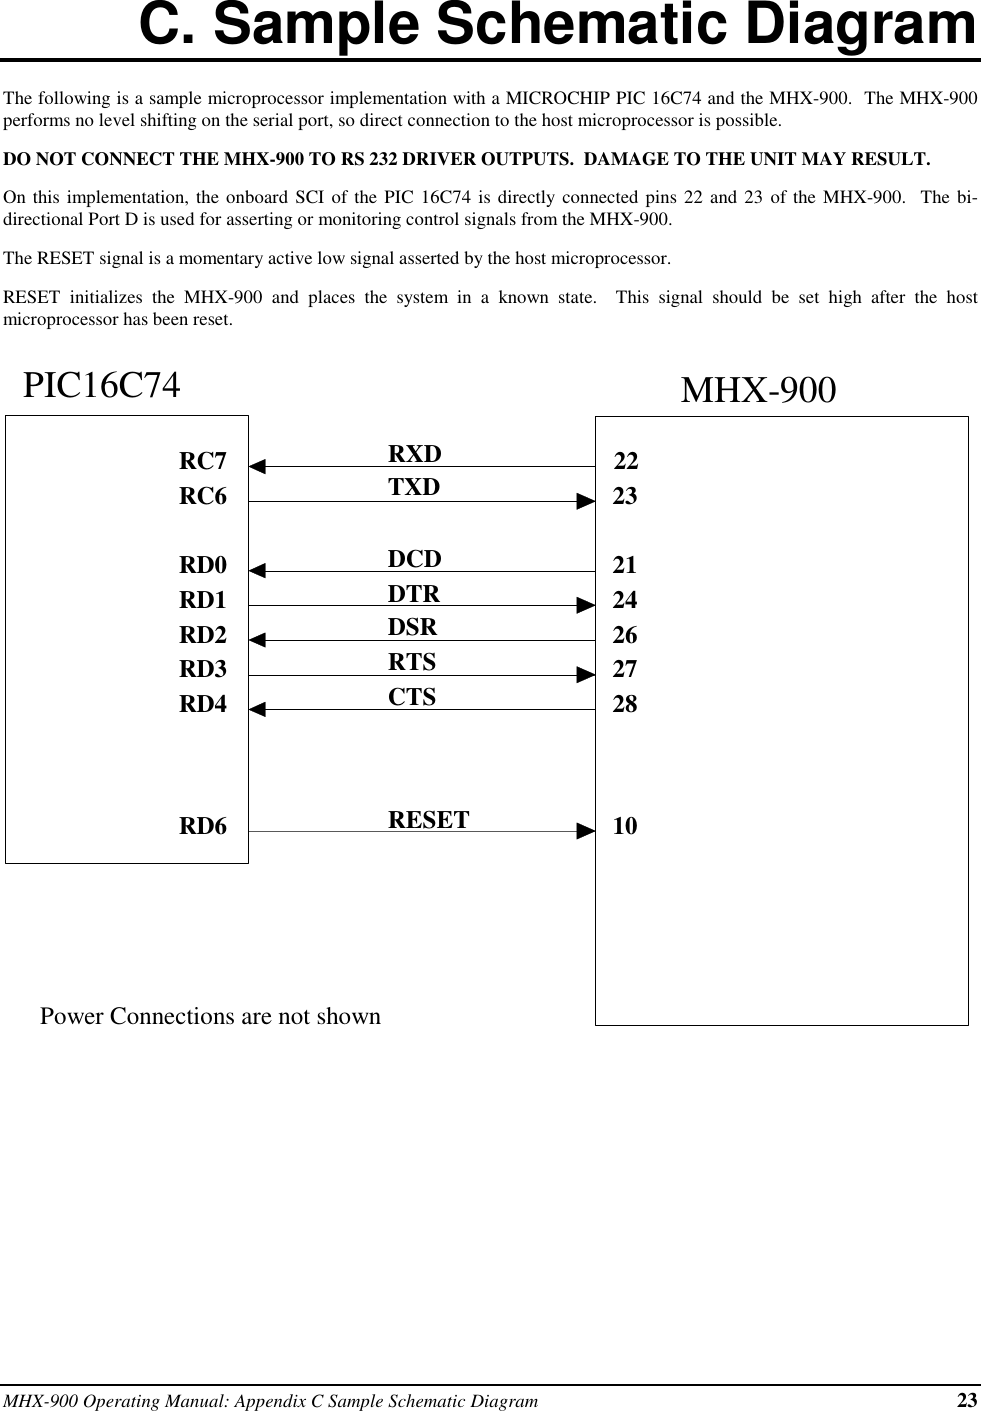 MHX-900 Operating Manual: Appendix C Sample Schematic Diagram 23C. Sample Schematic DiagramThe following is a sample microprocessor implementation with a MICROCHIP PIC 16C74 and the MHX-900.  The MHX-900performs no level shifting on the serial port, so direct connection to the host microprocessor is possible.DO NOT CONNECT THE MHX-900 TO RS 232 DRIVER OUTPUTS.  DAMAGE TO THE UNIT MAY RESULT.On this implementation, the onboard SCI of the PIC 16C74 is directly connected pins 22 and 23 of the MHX-900.  The bi-directional Port D is used for asserting or monitoring control signals from the MHX-900.The RESET signal is a momentary active low signal asserted by the host microprocessor.RESET initializes the MHX-900 and places the system in a known state.  This signal should be set high after the hostmicroprocessor has been reset.RXDTXDDCDDTRDSRRTSCTSRESETPIC16C74MHX-9002223212426272810Power Connections are not shownRC7RC6RD0RD1RD2RD3RD4RD6